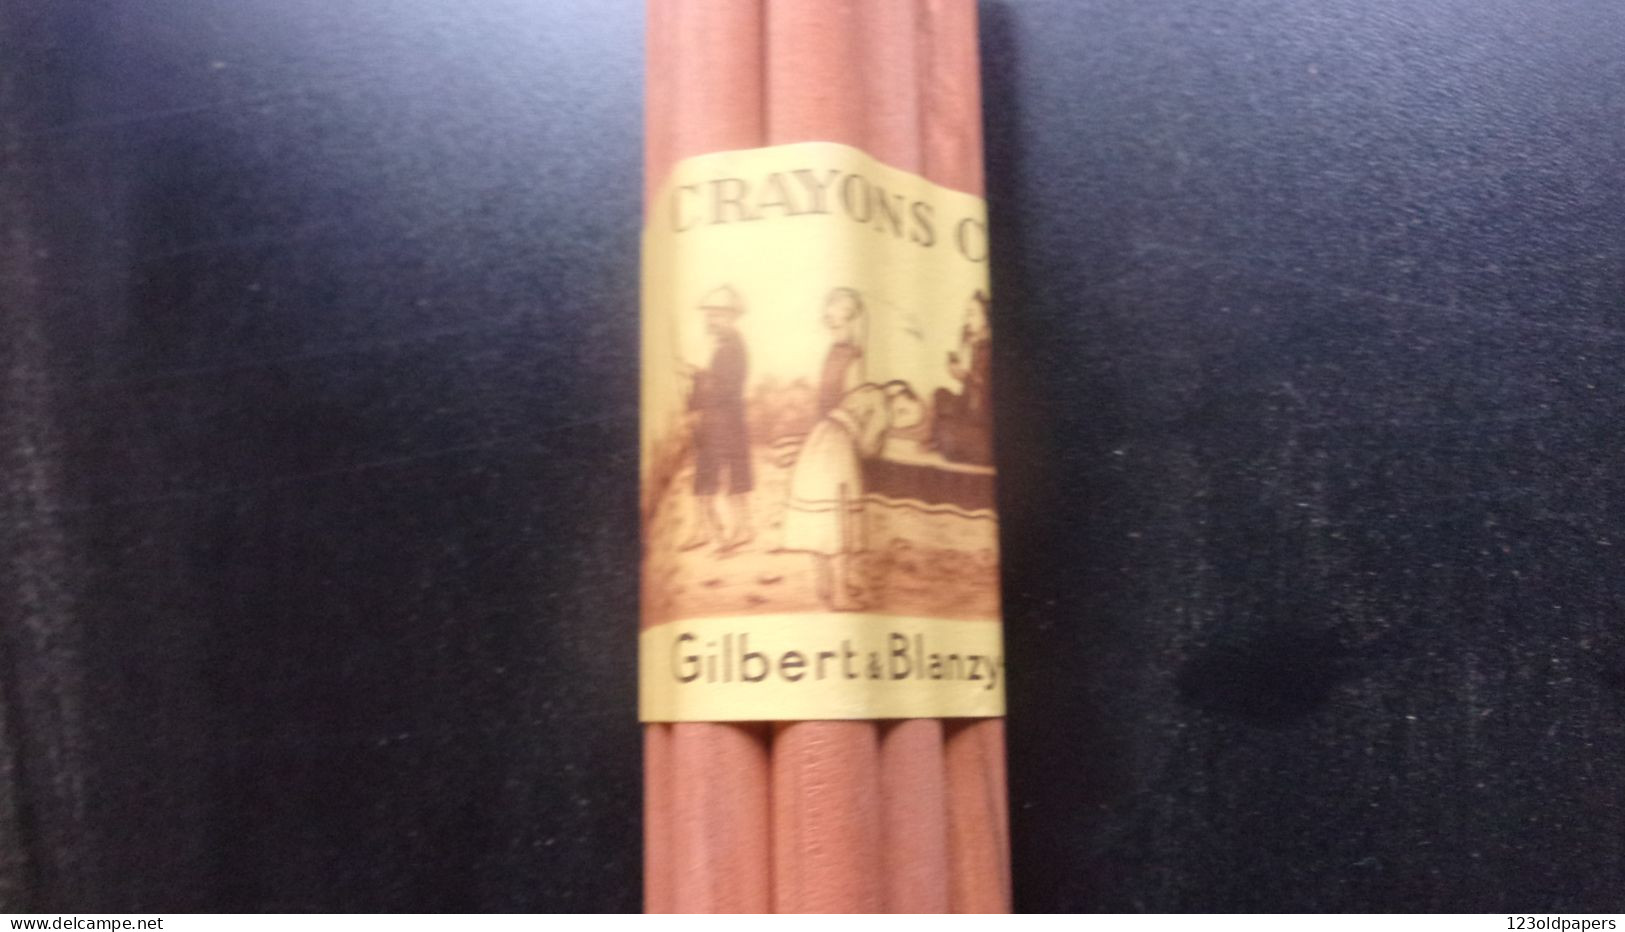 ️ RARE COMME NEUF   GILBERT BLANZY POURE CRAYONS CHINOIS ENSEMBLE NON OUVERT 12 CRAYONS N°2 - Stylos